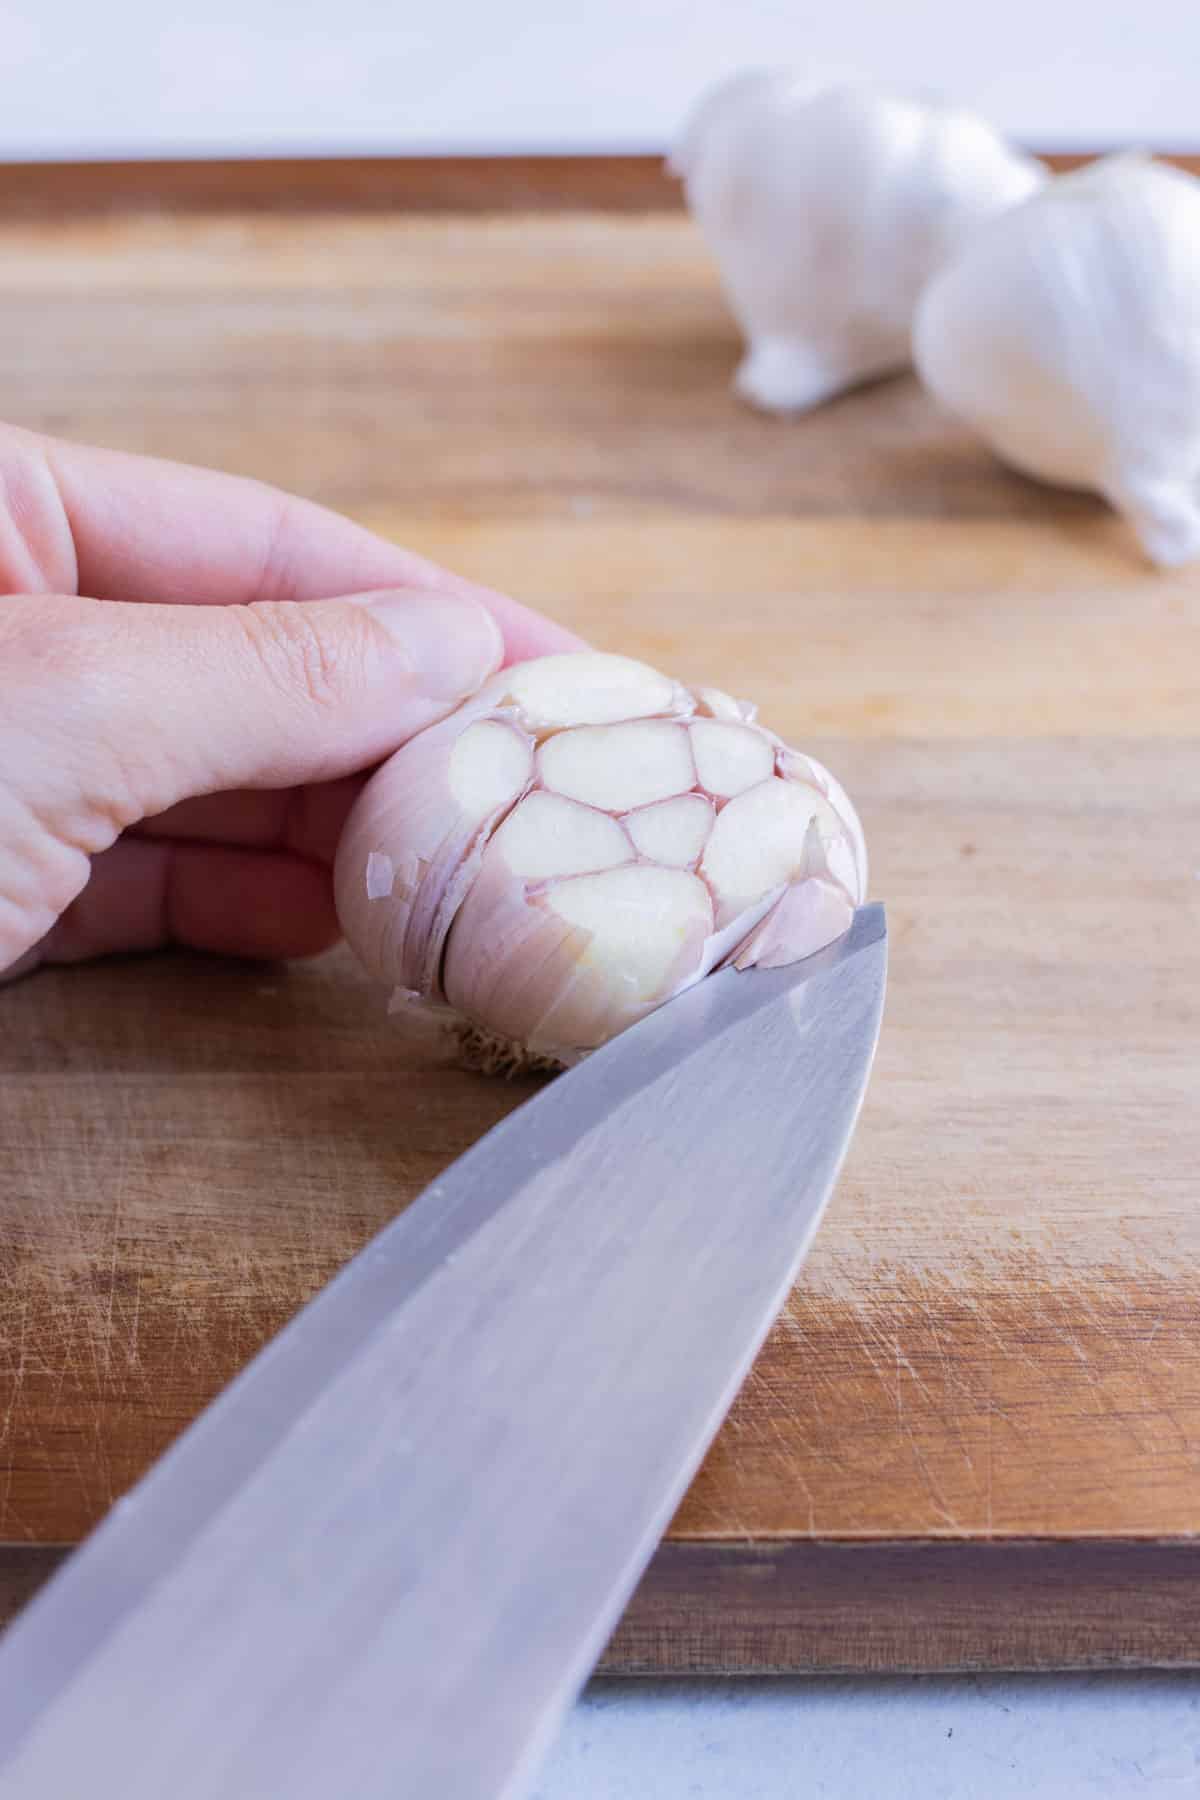 The outer bulbs are trimmed so that all the cloves of garlic are exposed.